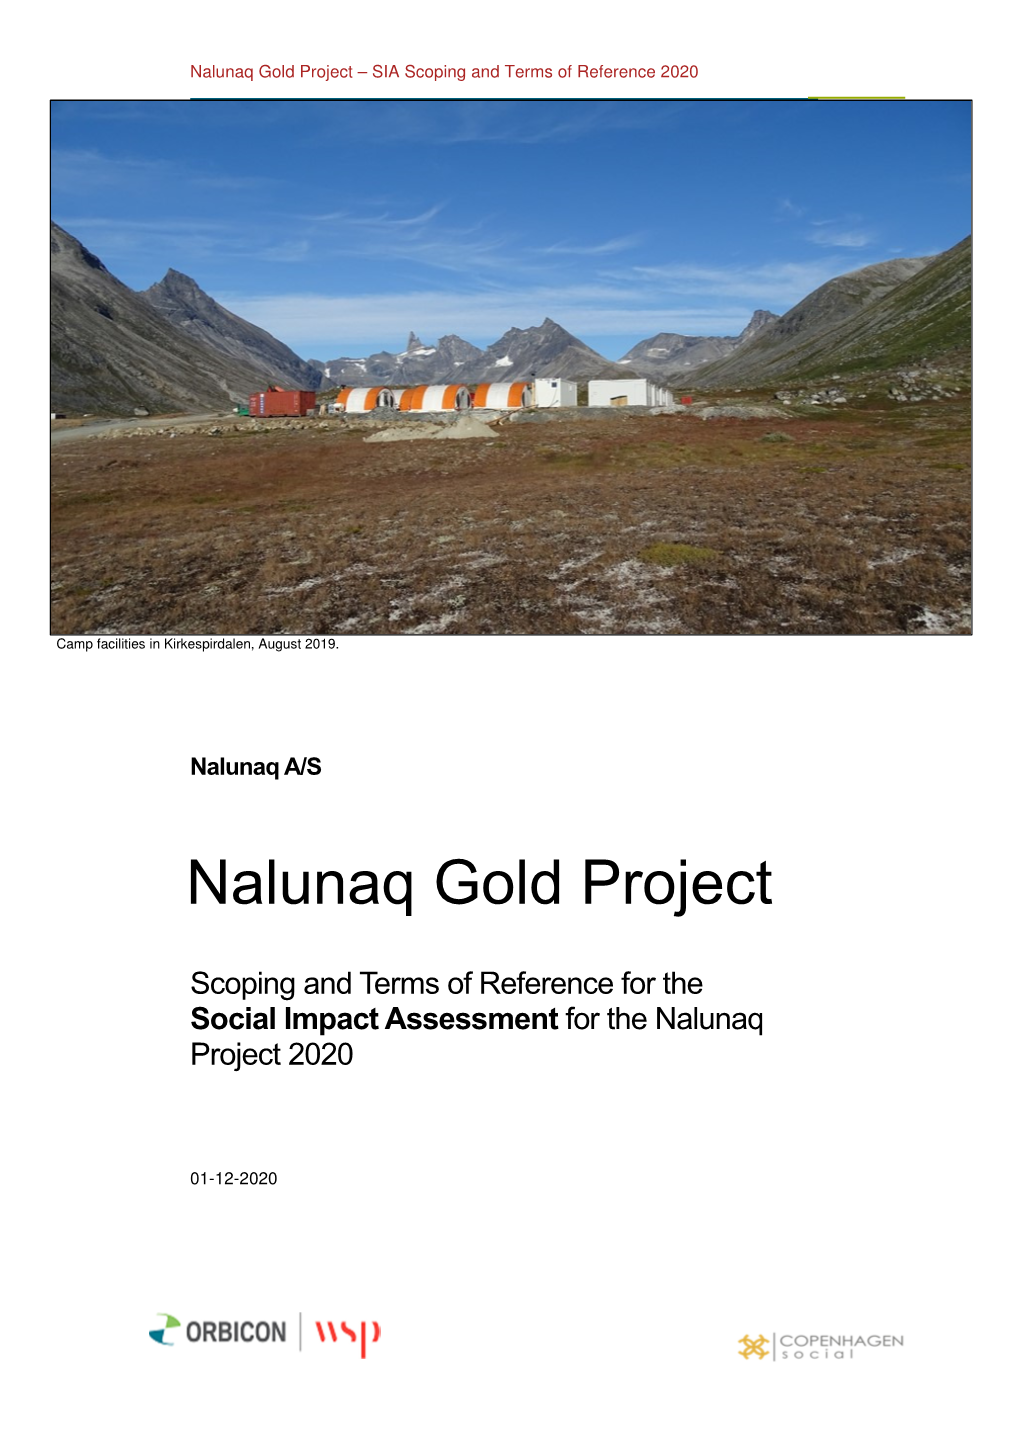 Nalunaq Gold Project – SIA Scoping and Terms of Reference 2020